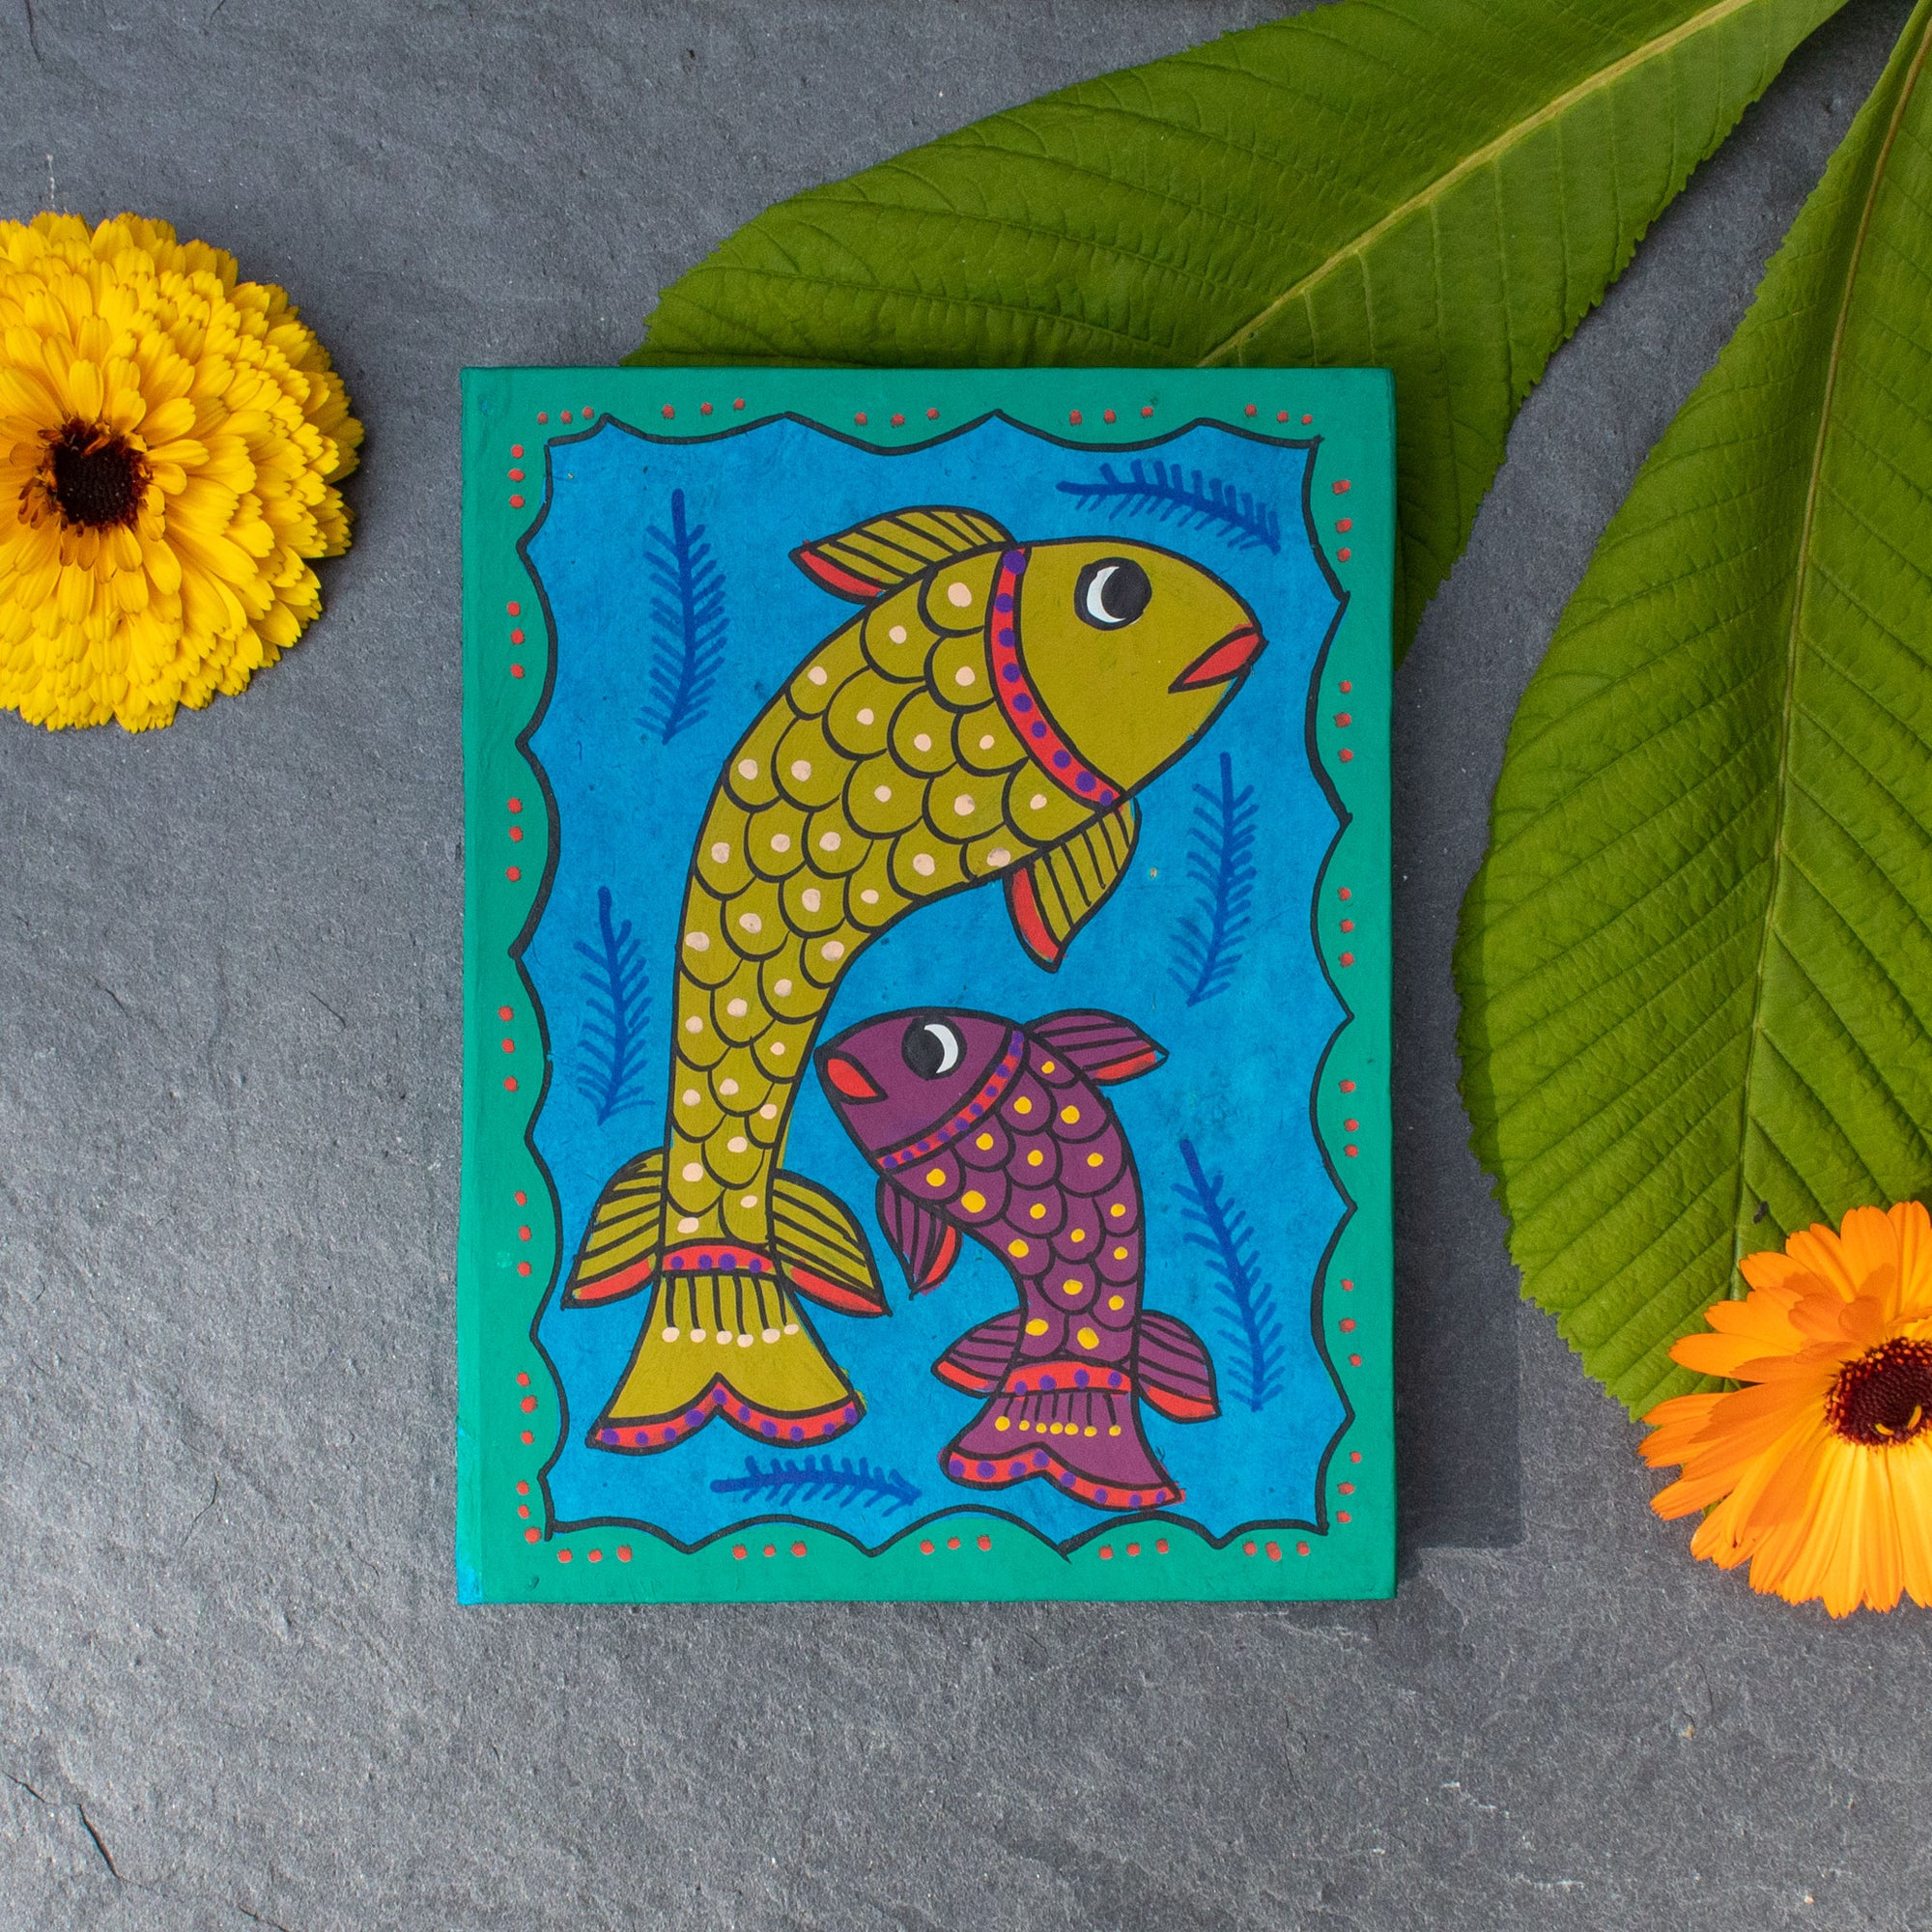 Mudhubani Fish Notepad With Lokta Paper Pages - Green & Blue | Notepad - The Naughty Shrew